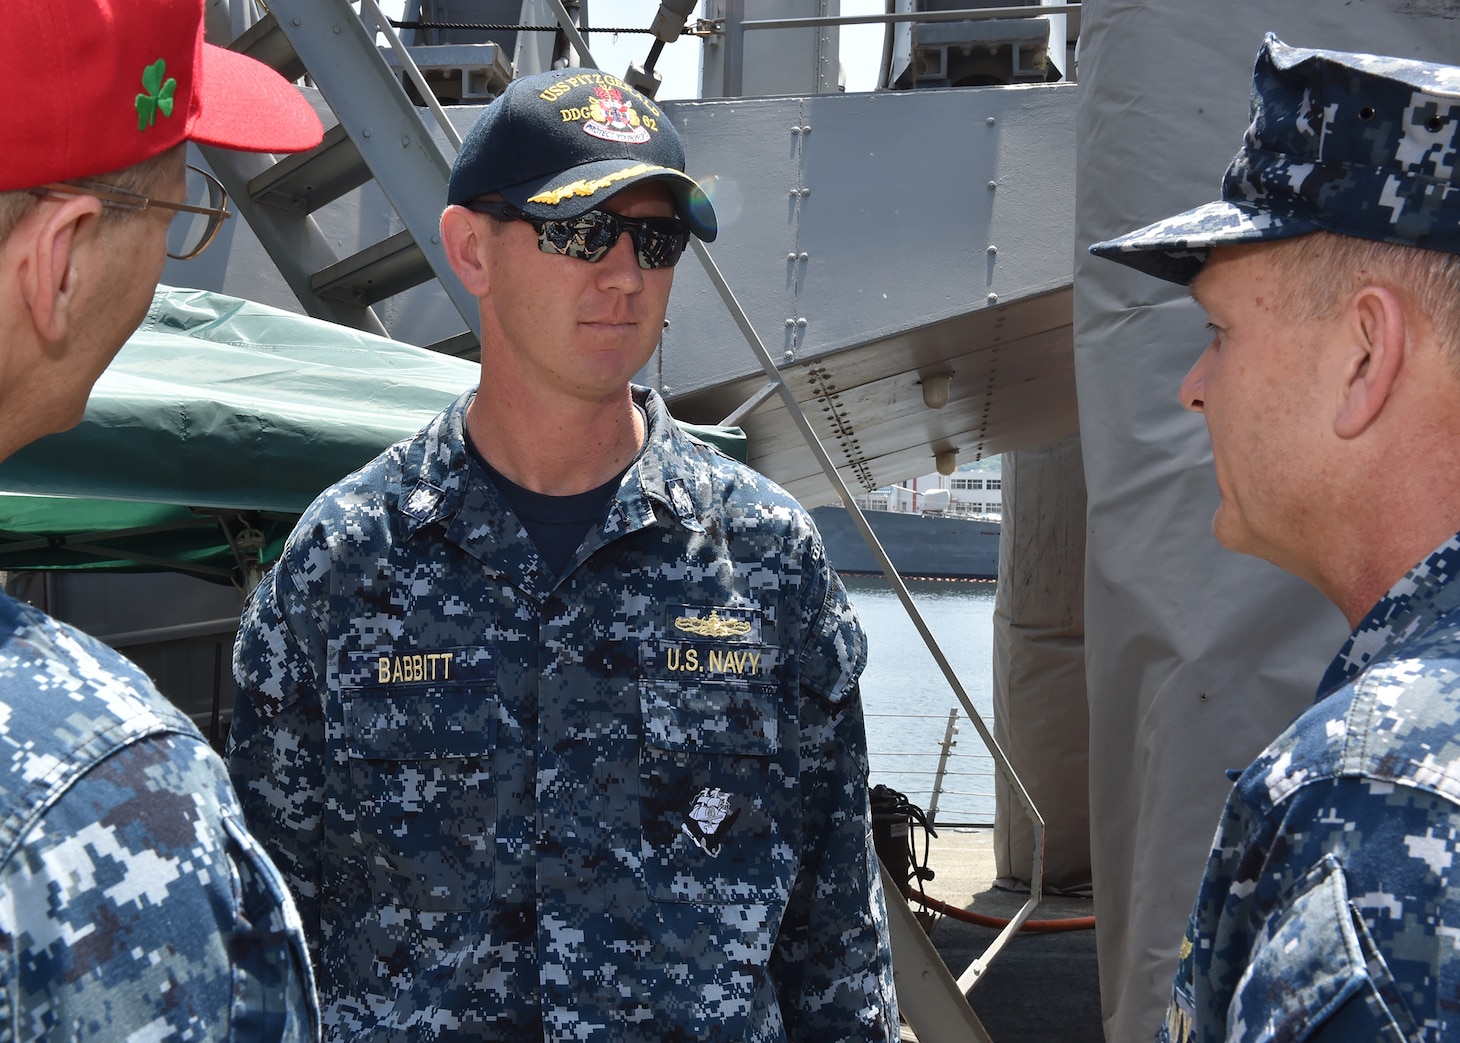 YOKOSUKA, Japan (June 19, 2017) Vice Adm. Joseph Aucoin, left, commander of U.S. 7th Fleet, and Rear Adm. Greg Fenton, right, commander of Naval Forces Japan/Navy Region Japan, speak to Cmdr. Sean Babbitt, executive officer of the guided-missile destroyer USS Fitzgerald (DDG 62). Babbitt temporarily took command of the ship after a collision with a merchant vessel June 17, 2017 when Fitzgerald's commanding officer was injured and medically evacuated. The ship suffered severe damage but returned to Fleet Activities Yokosuka under its own power. The incident is under investigation. U.S. Navy photo by (Mass Communication Specialist 2nd Class Richard L.J. Gourley/Released)